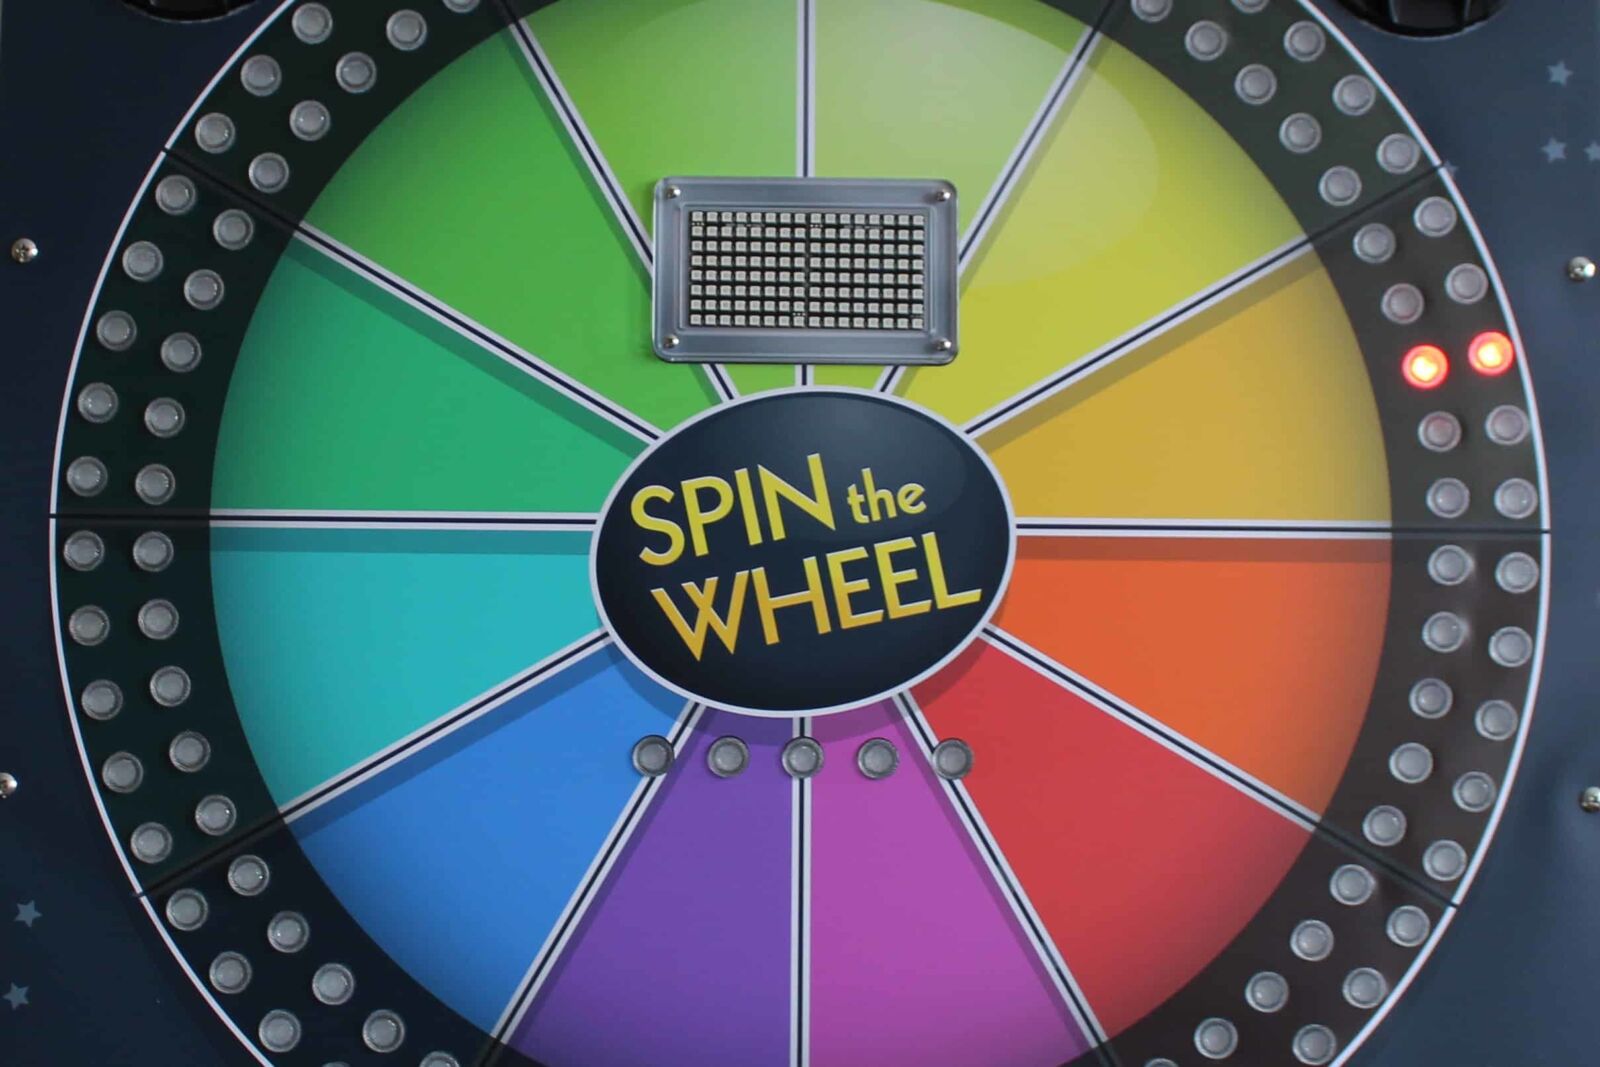 The Wheel Of Fortune